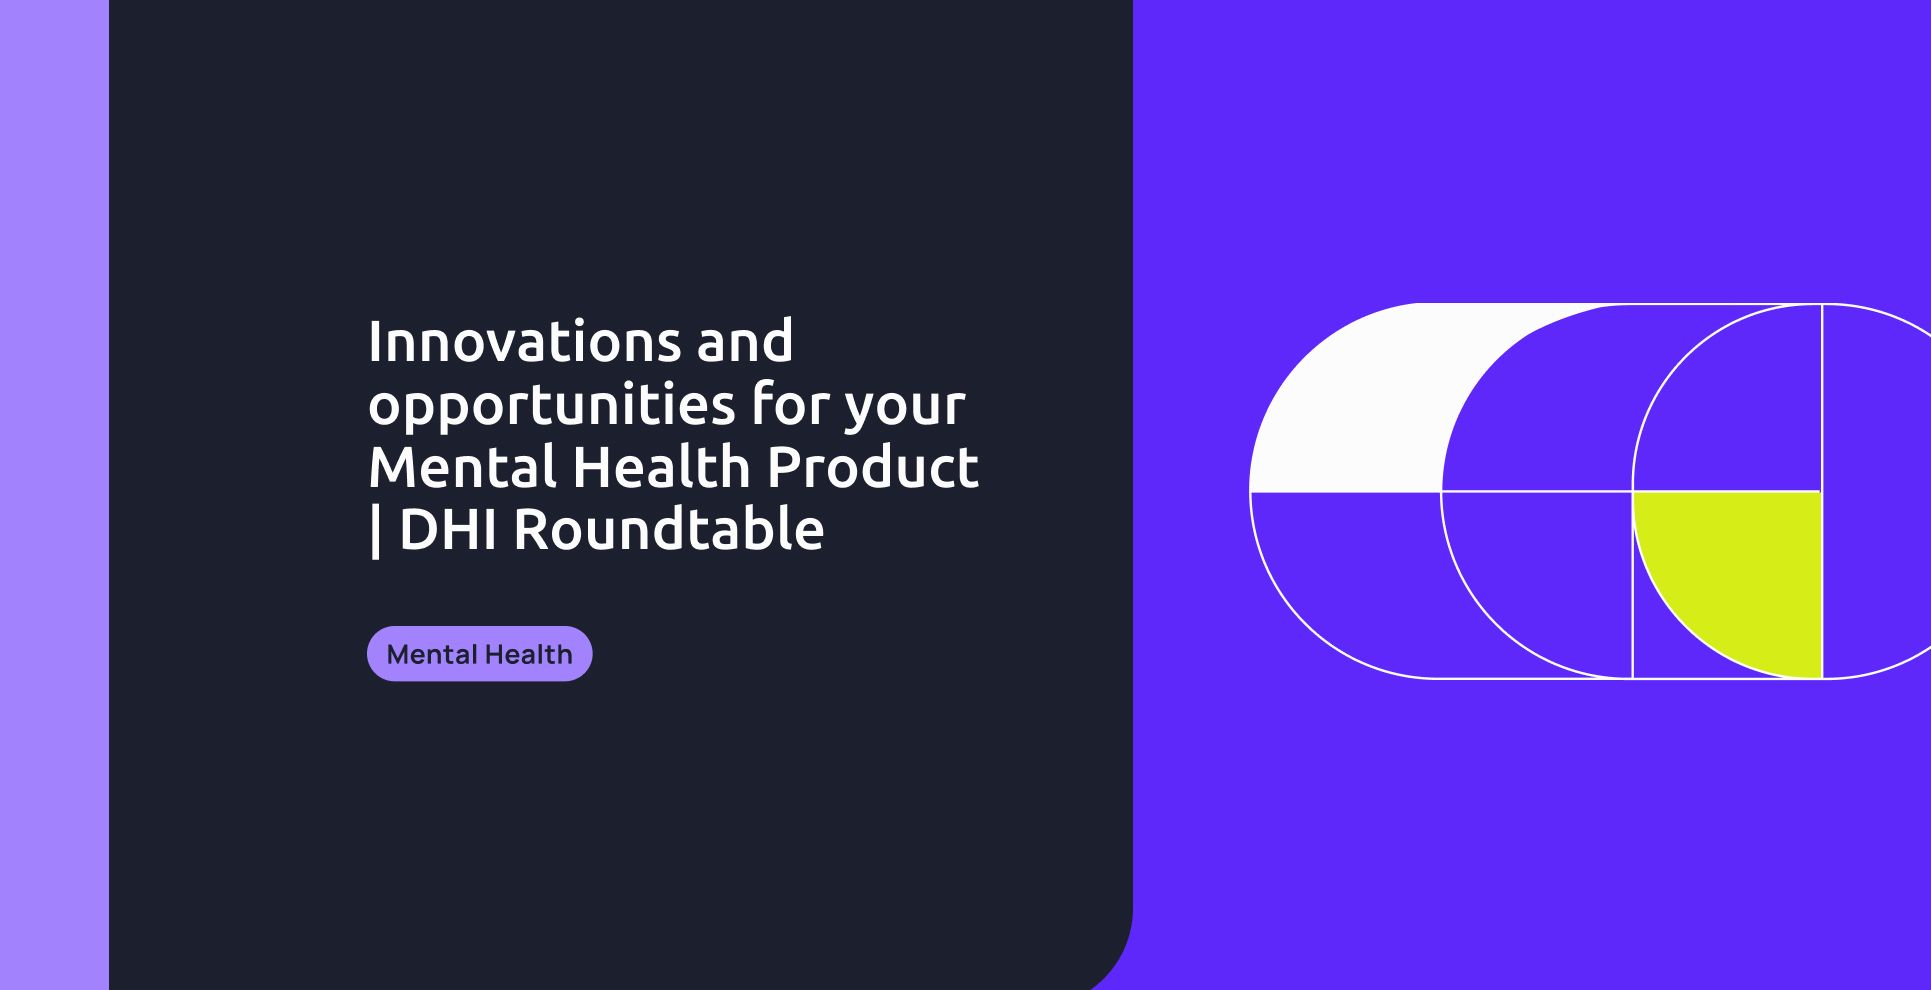 Innovations and opportunities for your Mental Health Product | DHI Roundtable